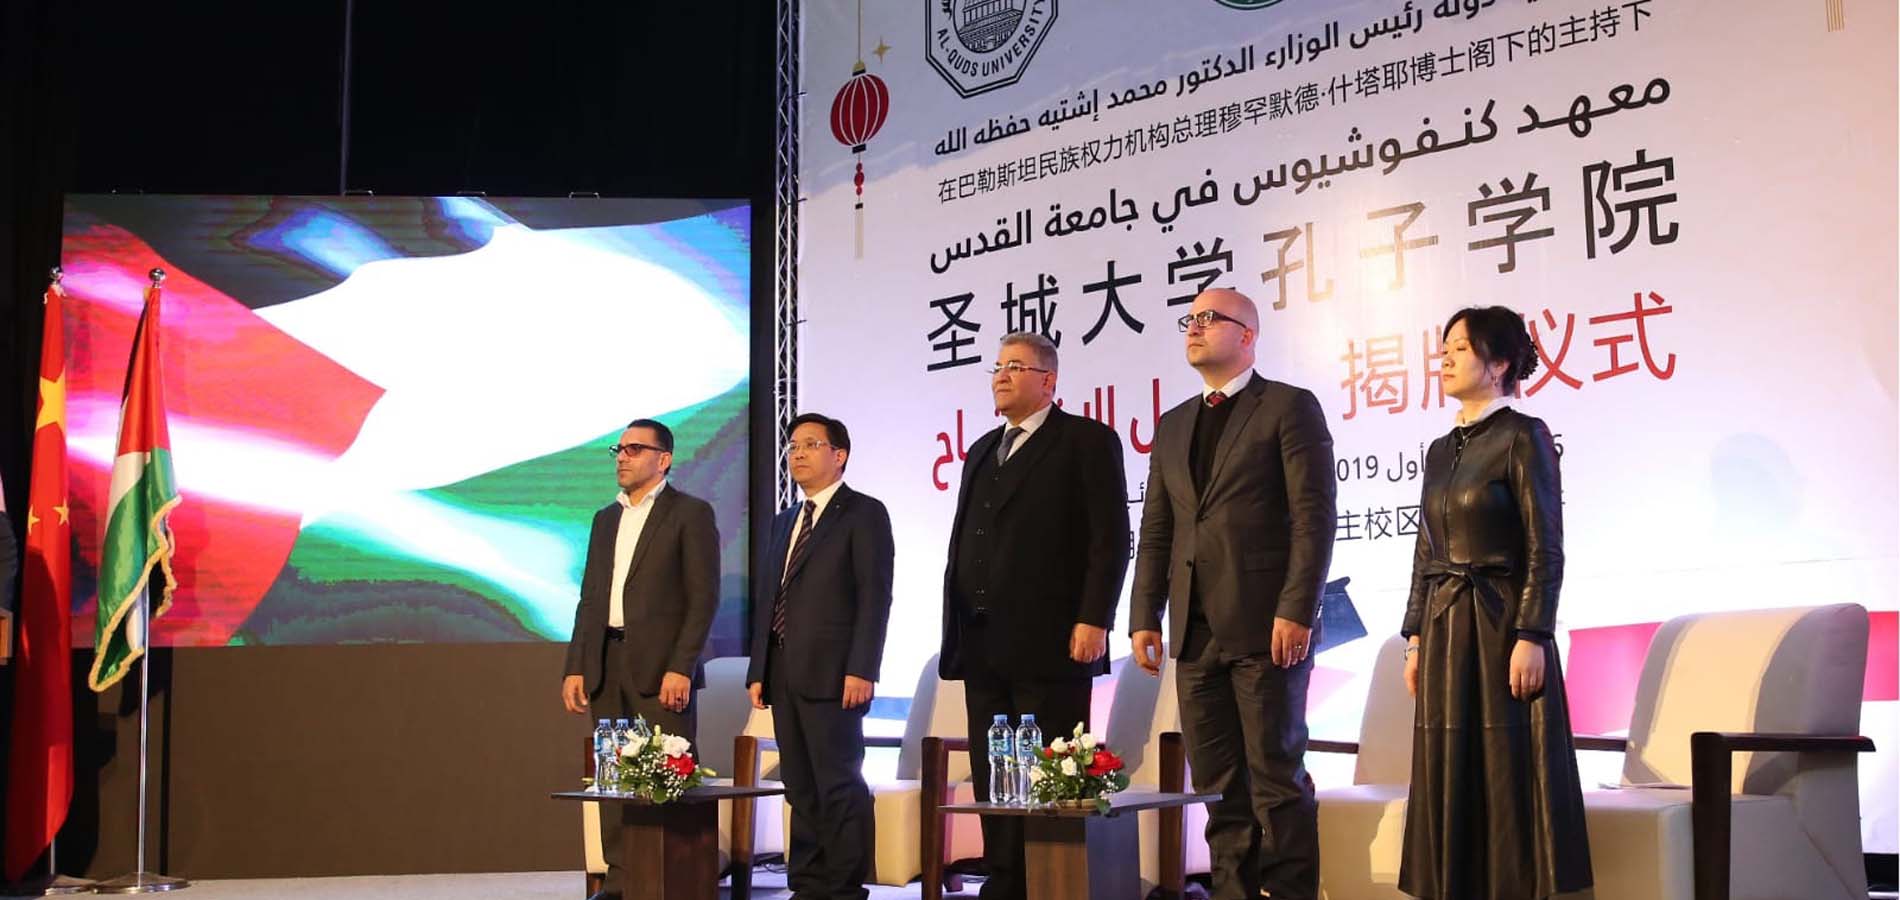 CIAQU official inauguration ceremony held on December 16th, 2019